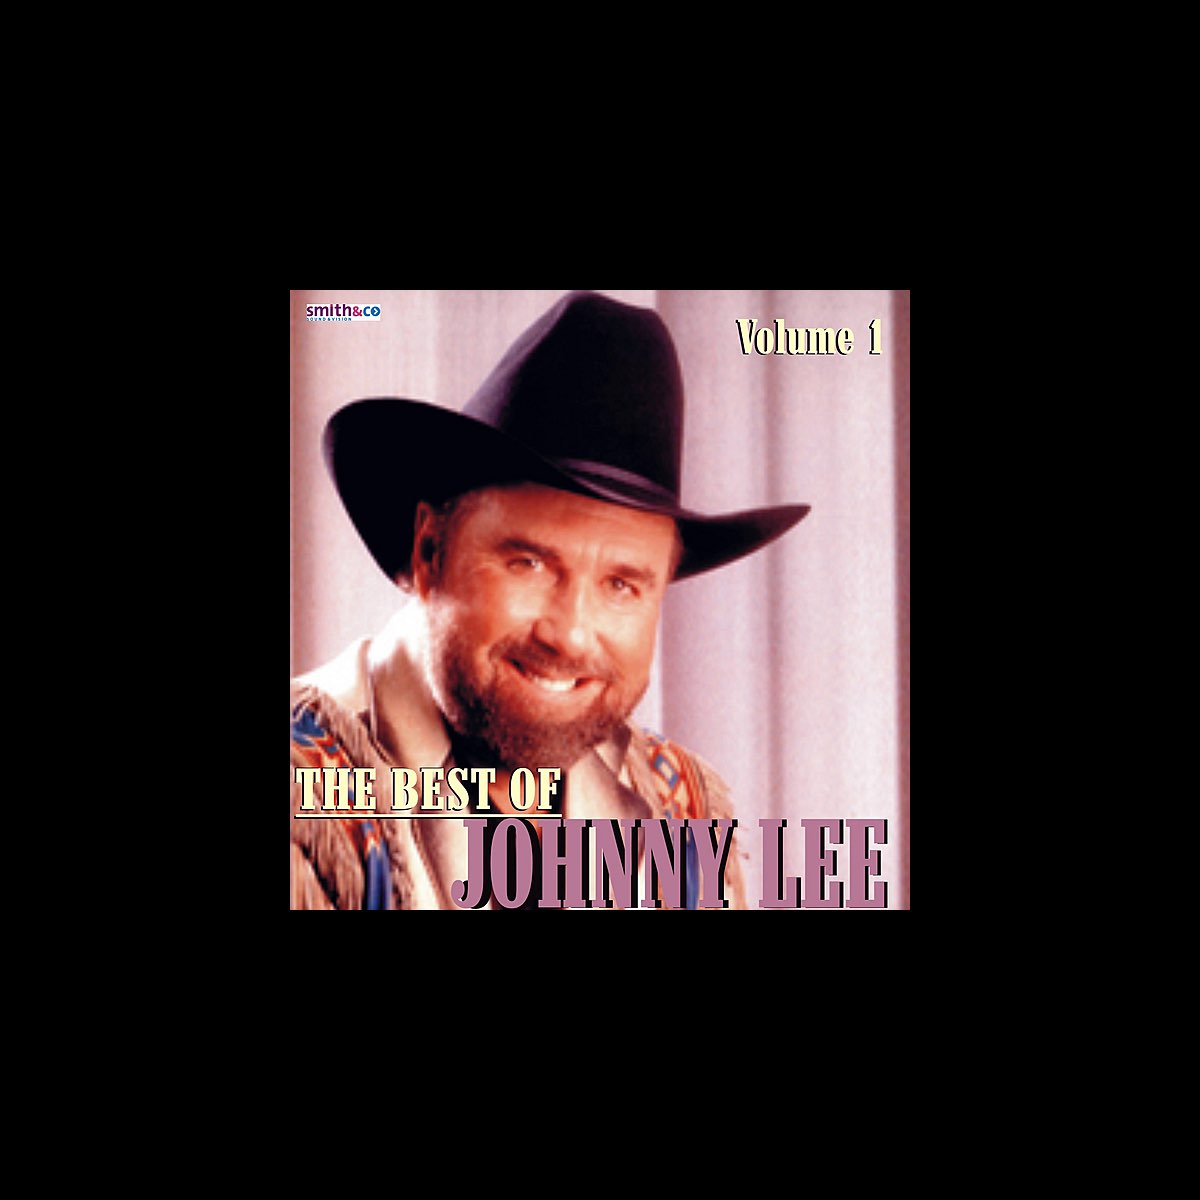 Best of Johnny Lee, Vol. 1 by Johnny Lee on Apple Music